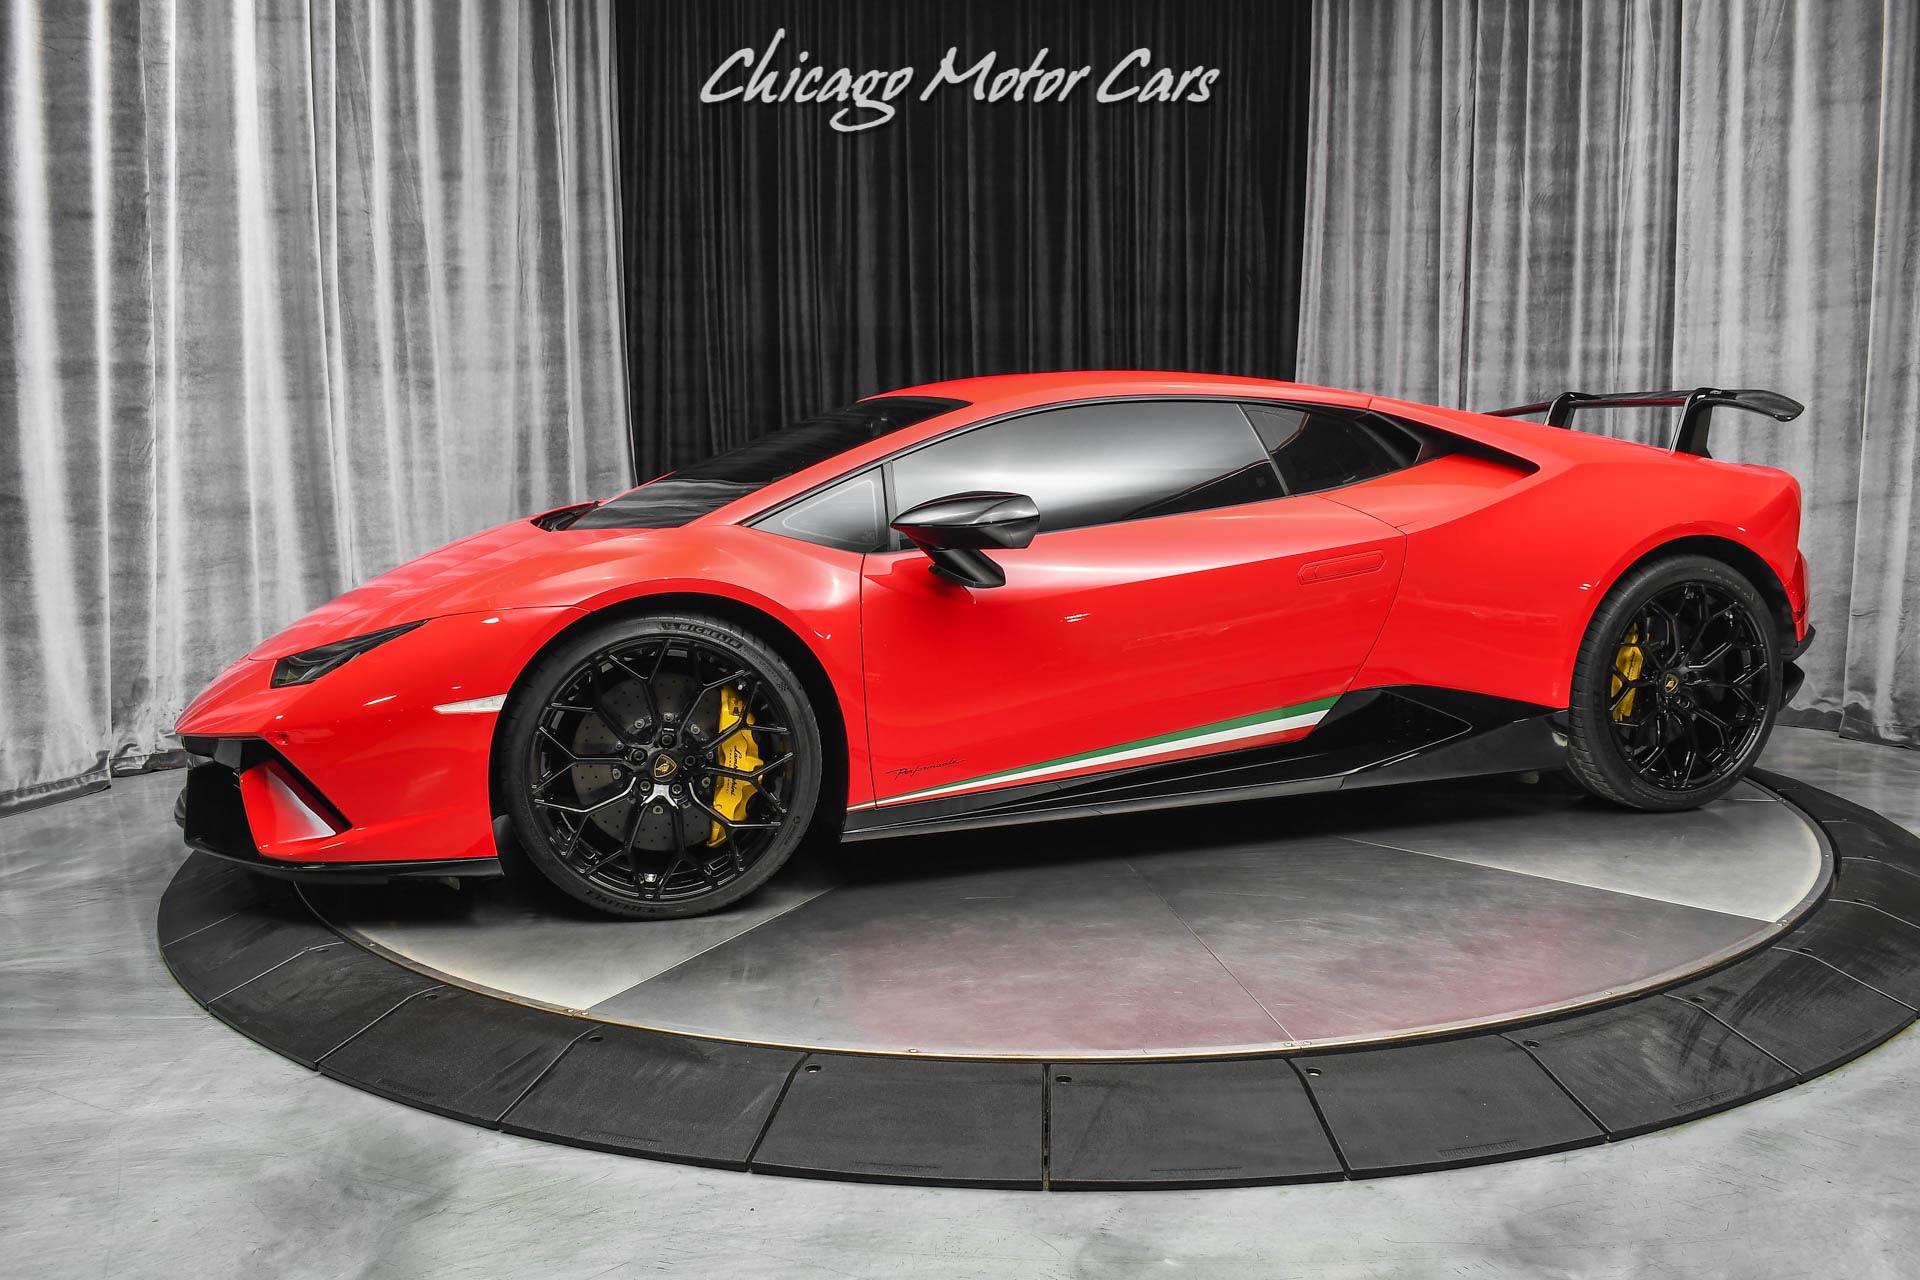 Used-2018-Lamborghini-Huracan-LP640-4-Performante-Coupe-LOADED-Stunning-Rosso-Mars-FI-EXHAUST